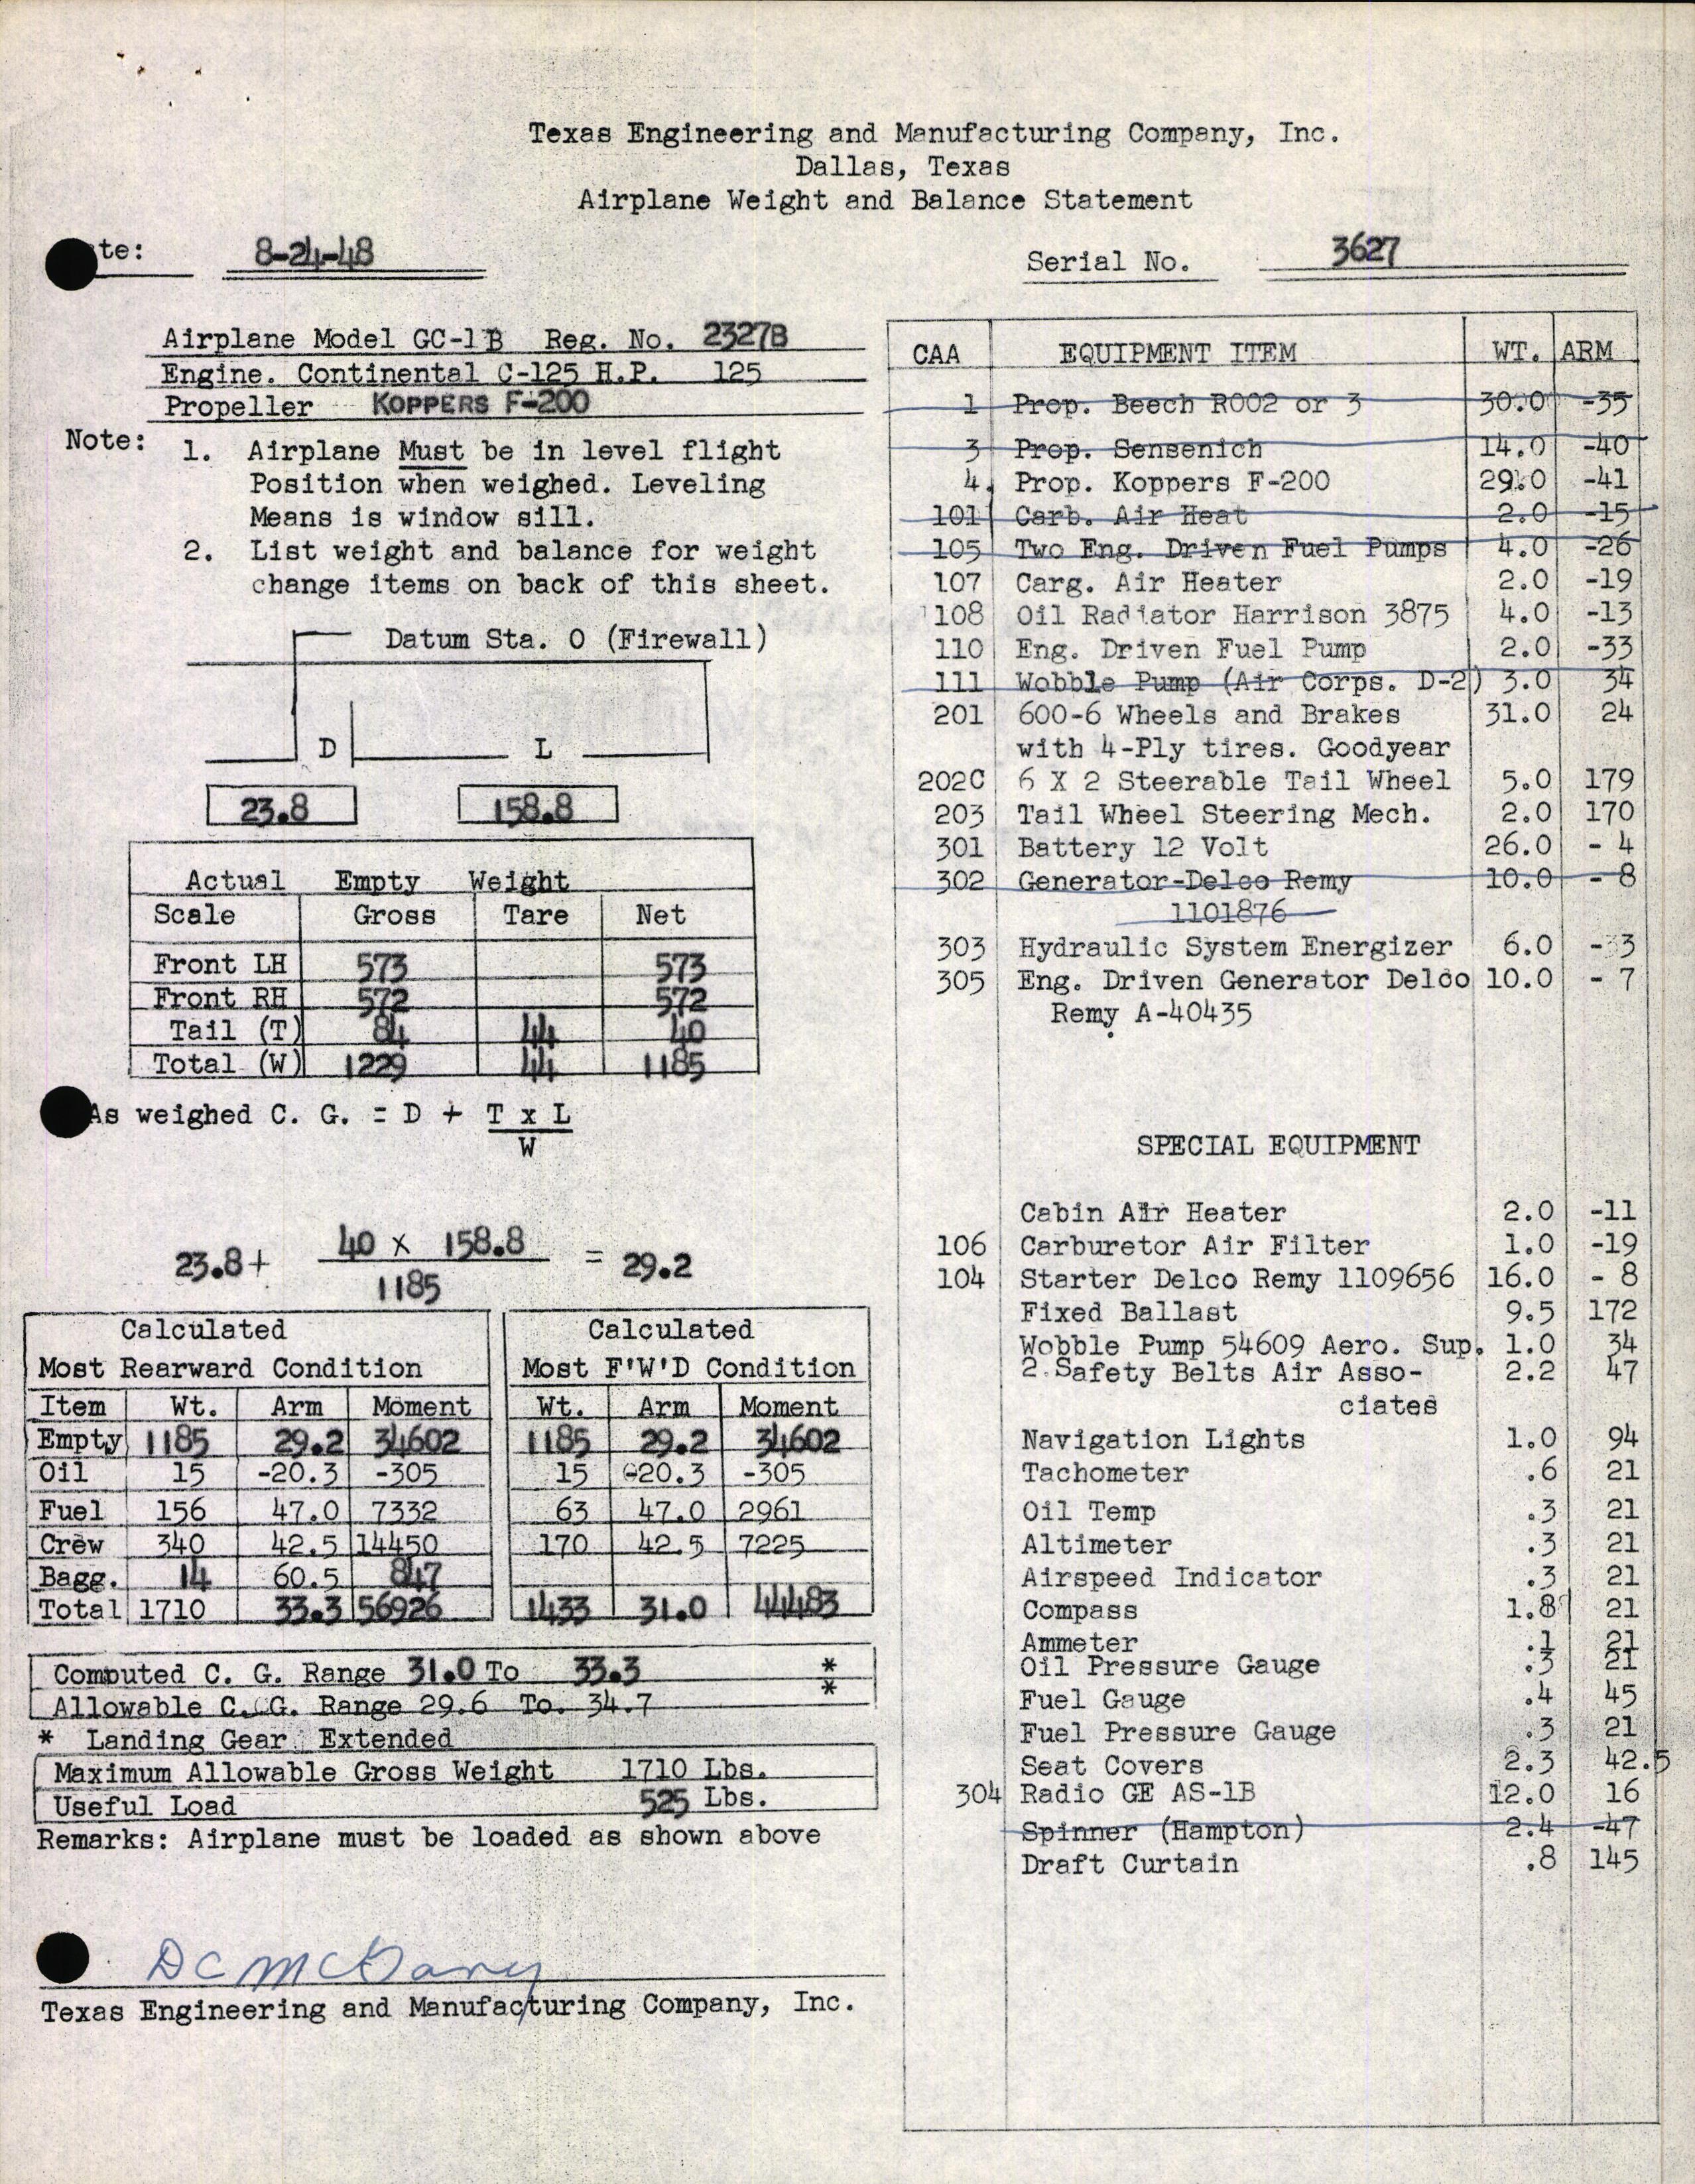 Sample page 4 from AirCorps Library document: Technical Information for Serial Number 3627